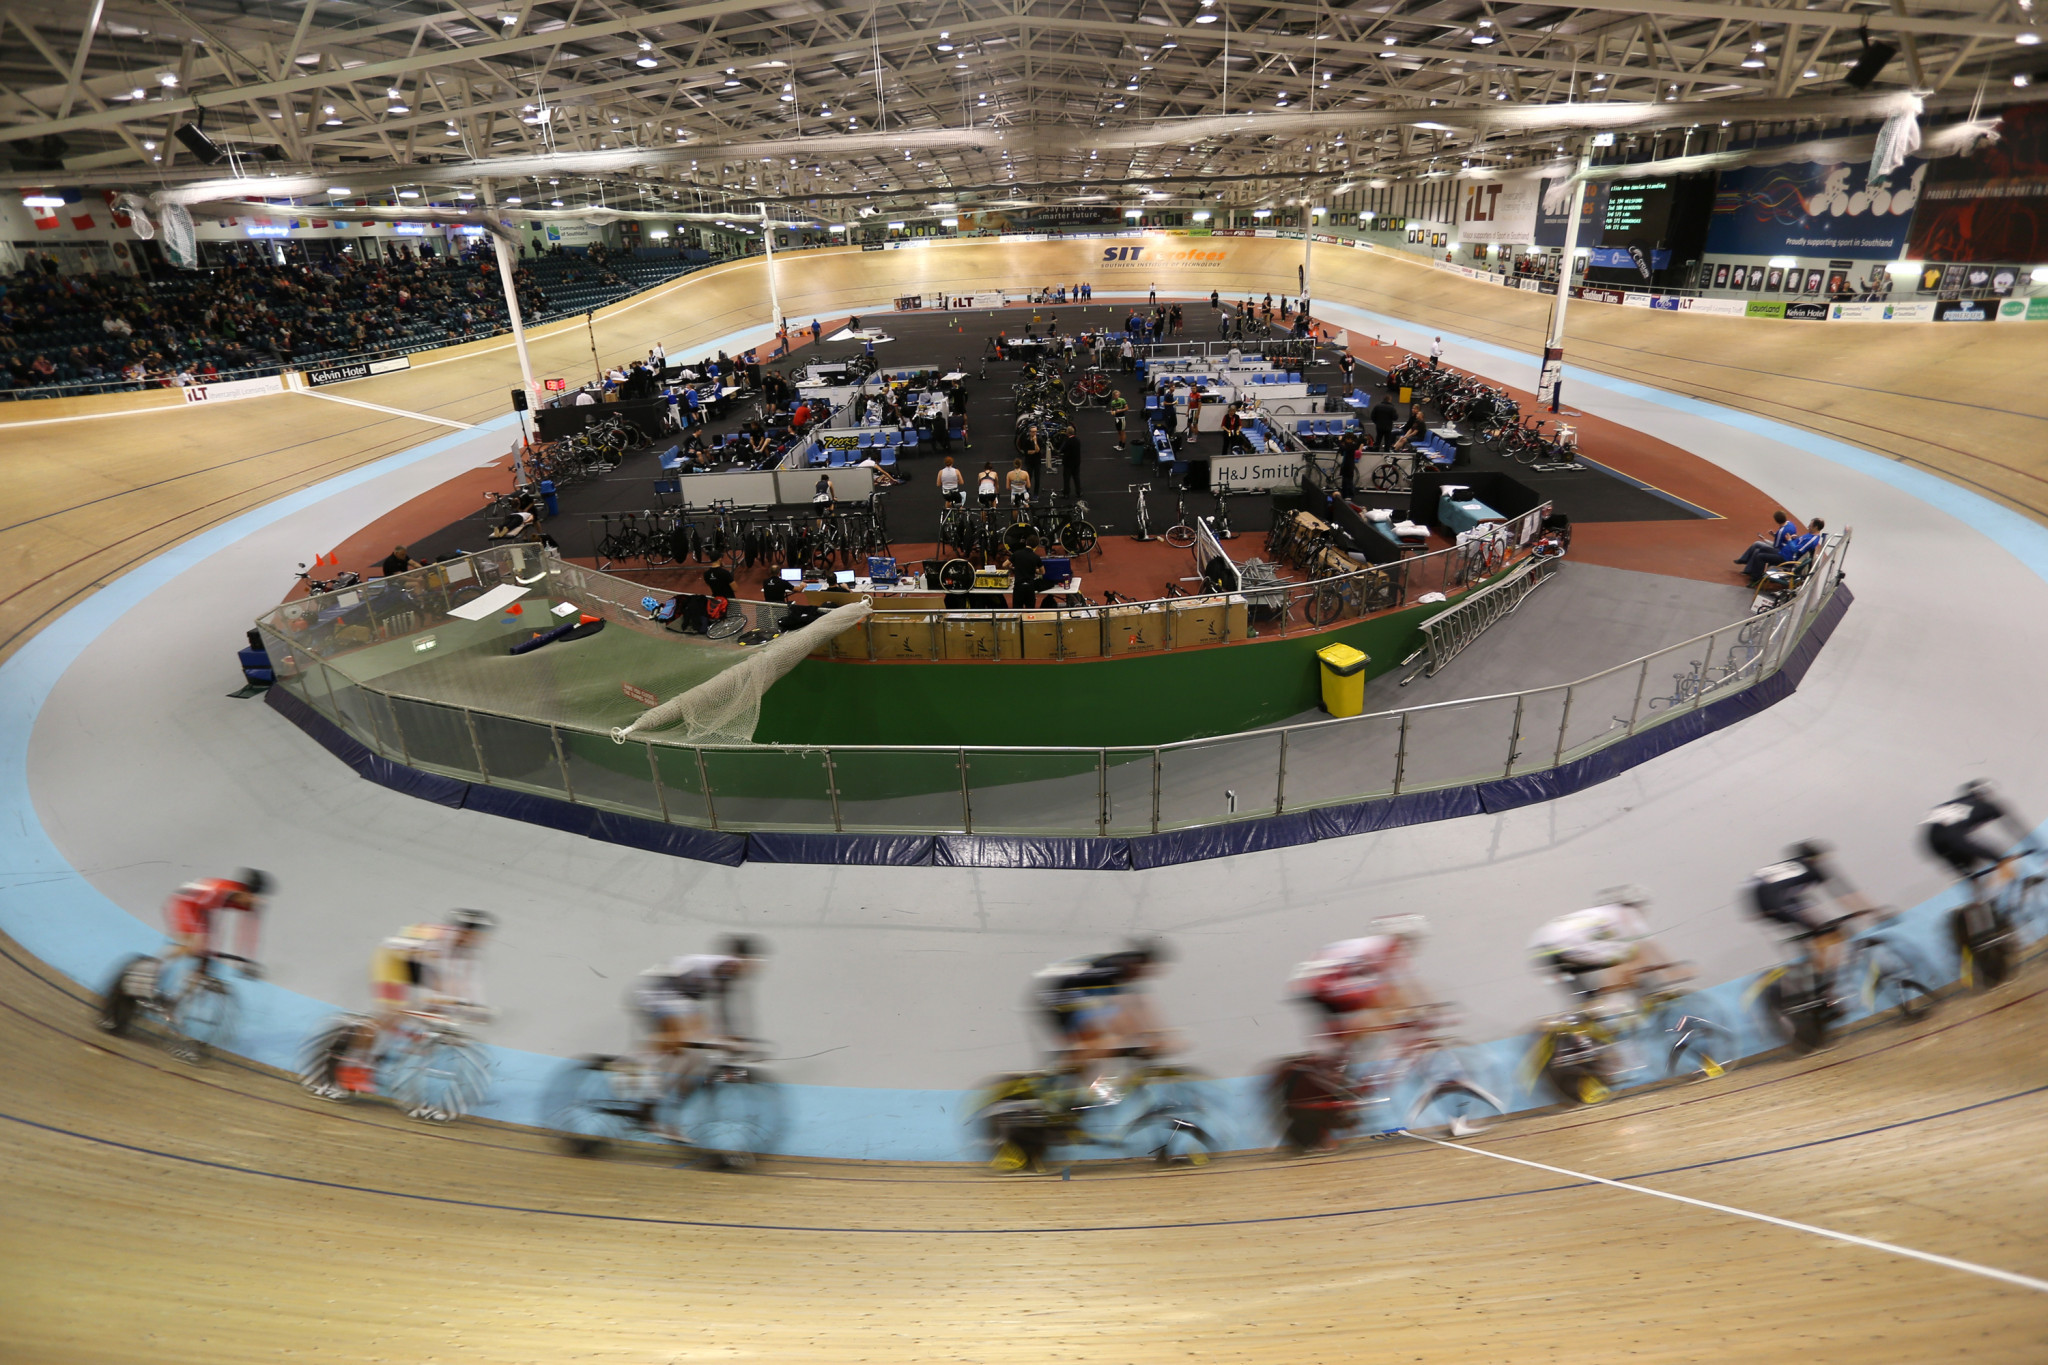 Invercargill to host 2020 Oceania Track Cycling Championships